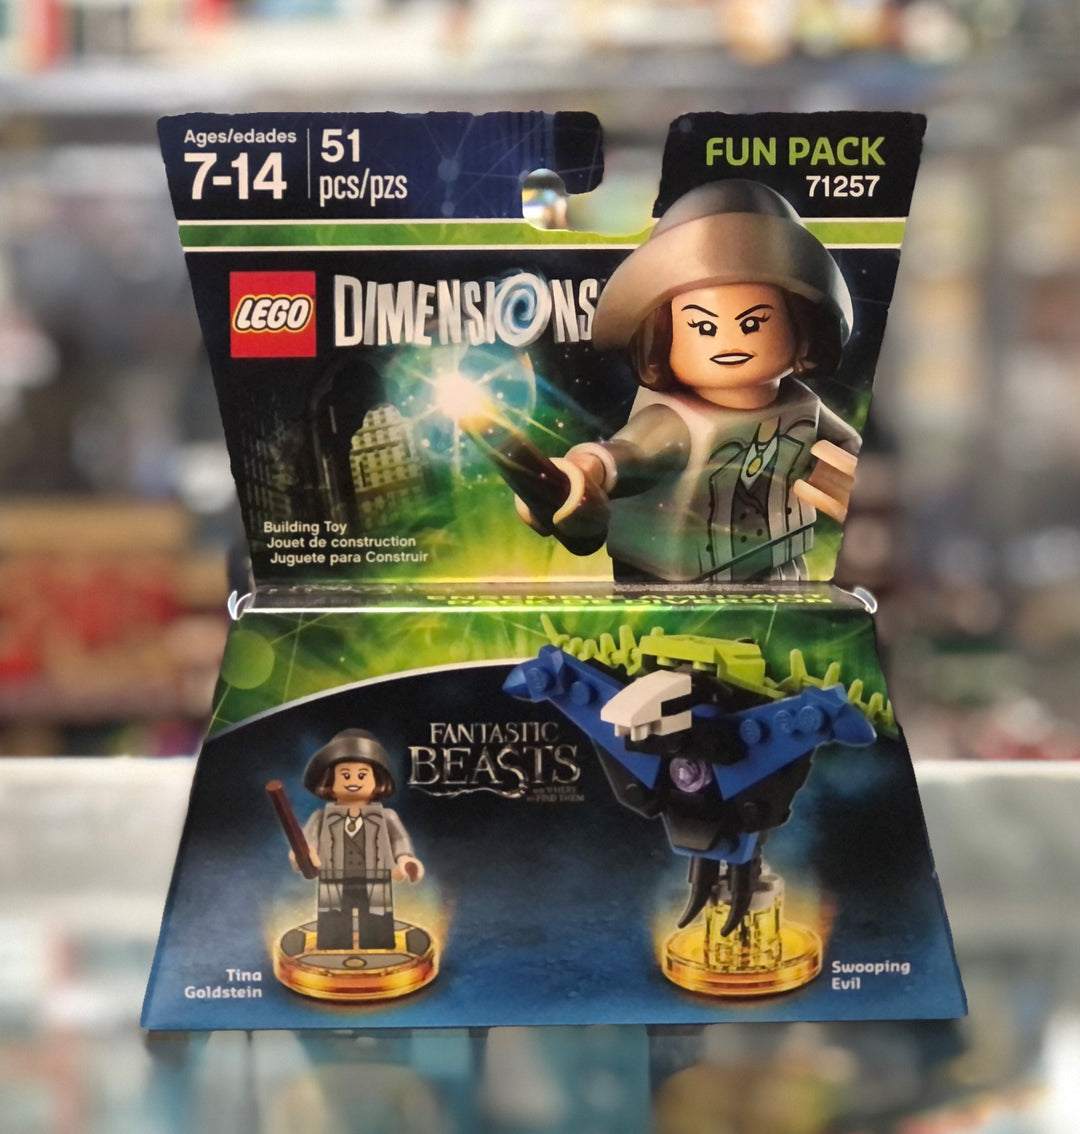 Fun Pack - Fantastic Beasts (Tina Goldstein and Swooping Evil), 71257